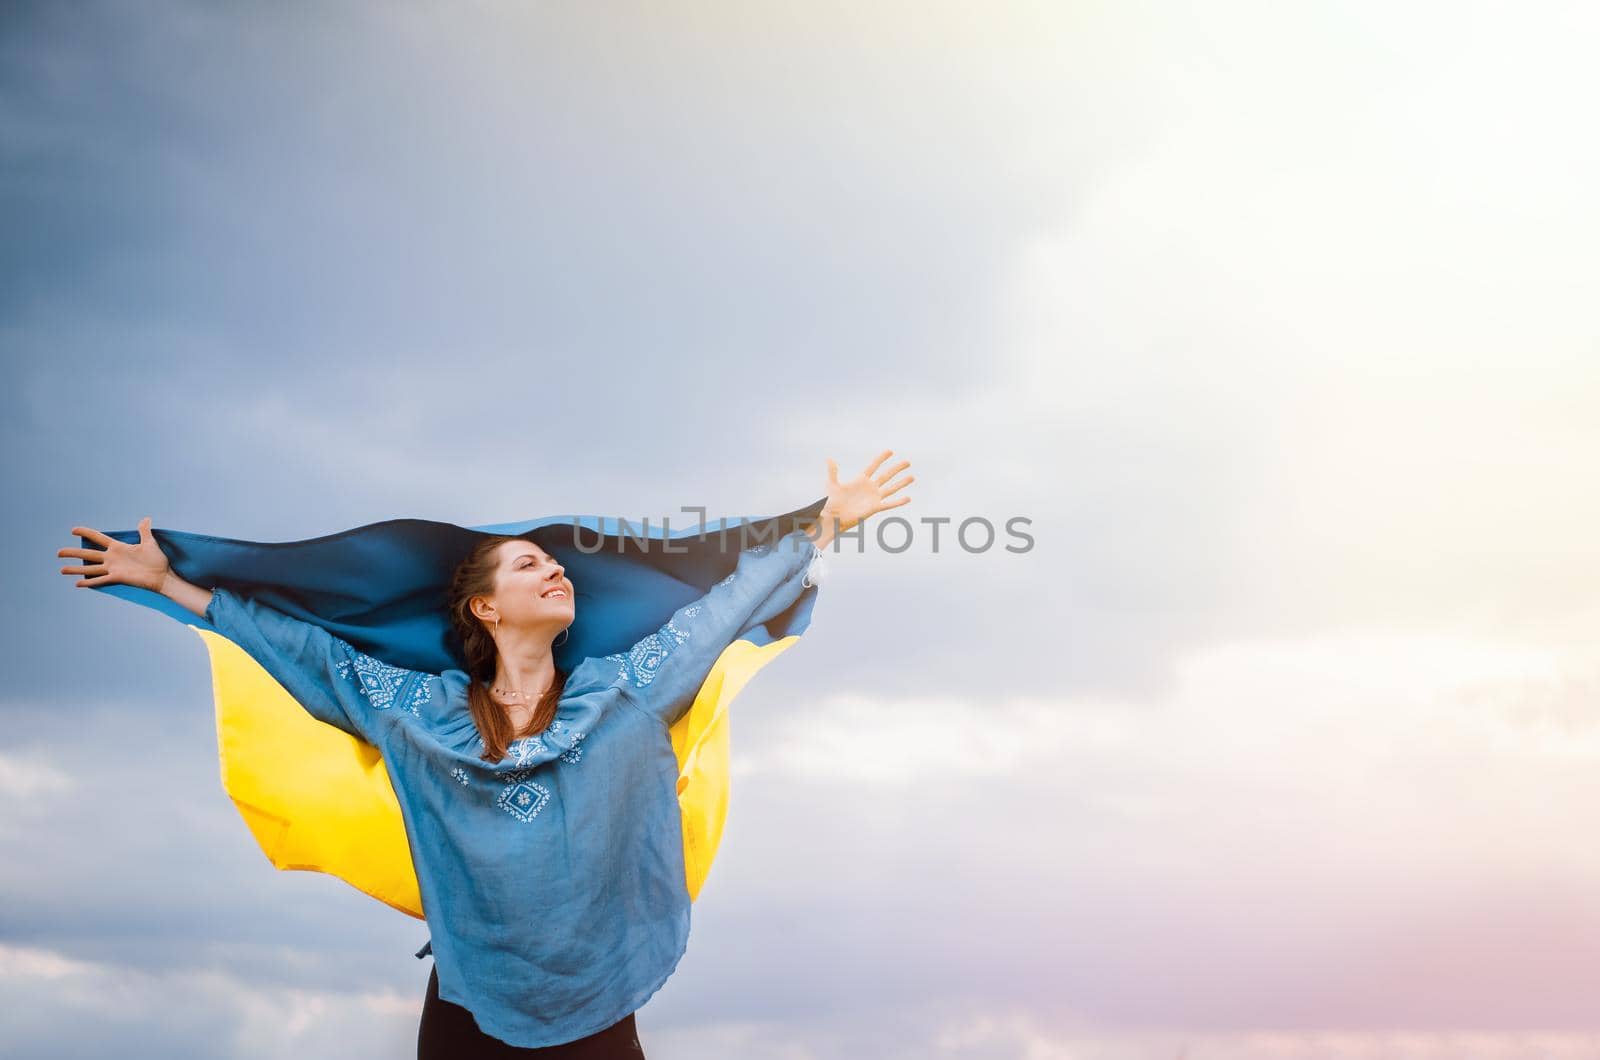 Happy free ukrainian woman with national flag on dramatic sky background. Portrait of lady in blue embroidery vyshyvanka shirt. Copy space. Ukraine, independence, patriot symbol. High quality photo